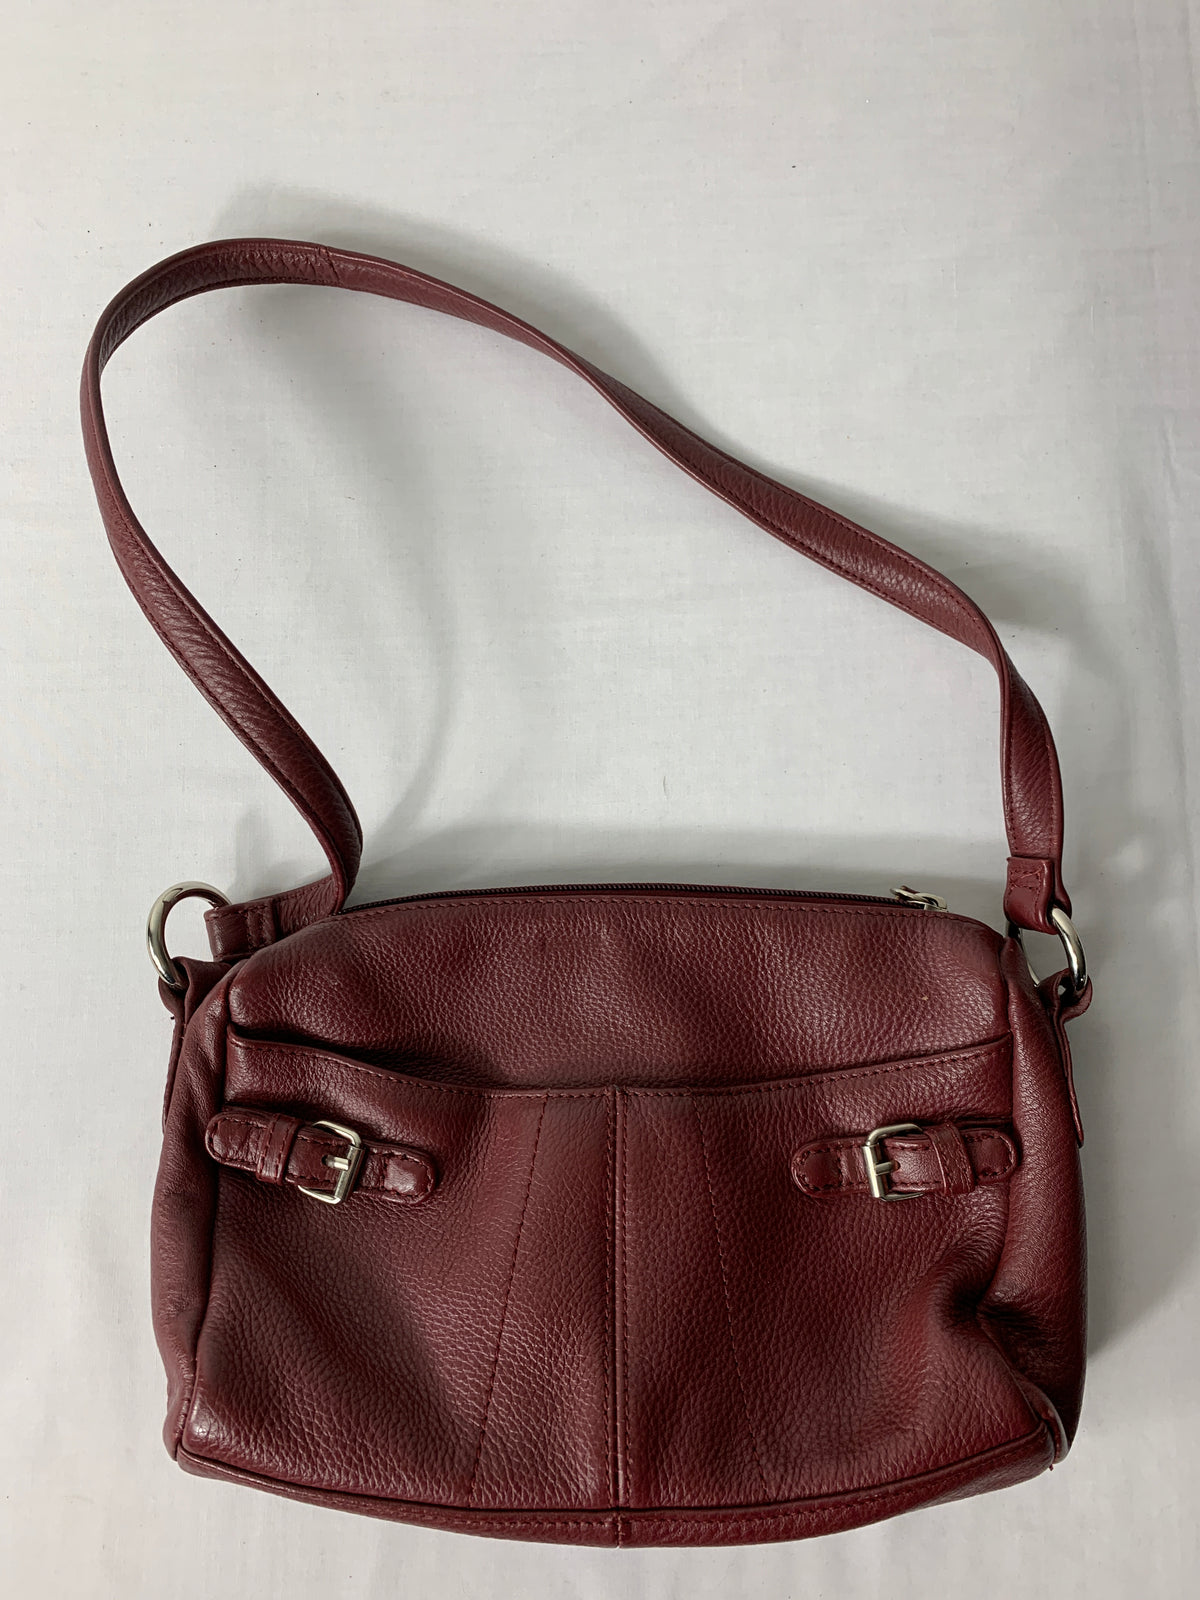 Stone Mountain Accessories, Bags, Sale Stone Mountain Shoulder Bag Nwt